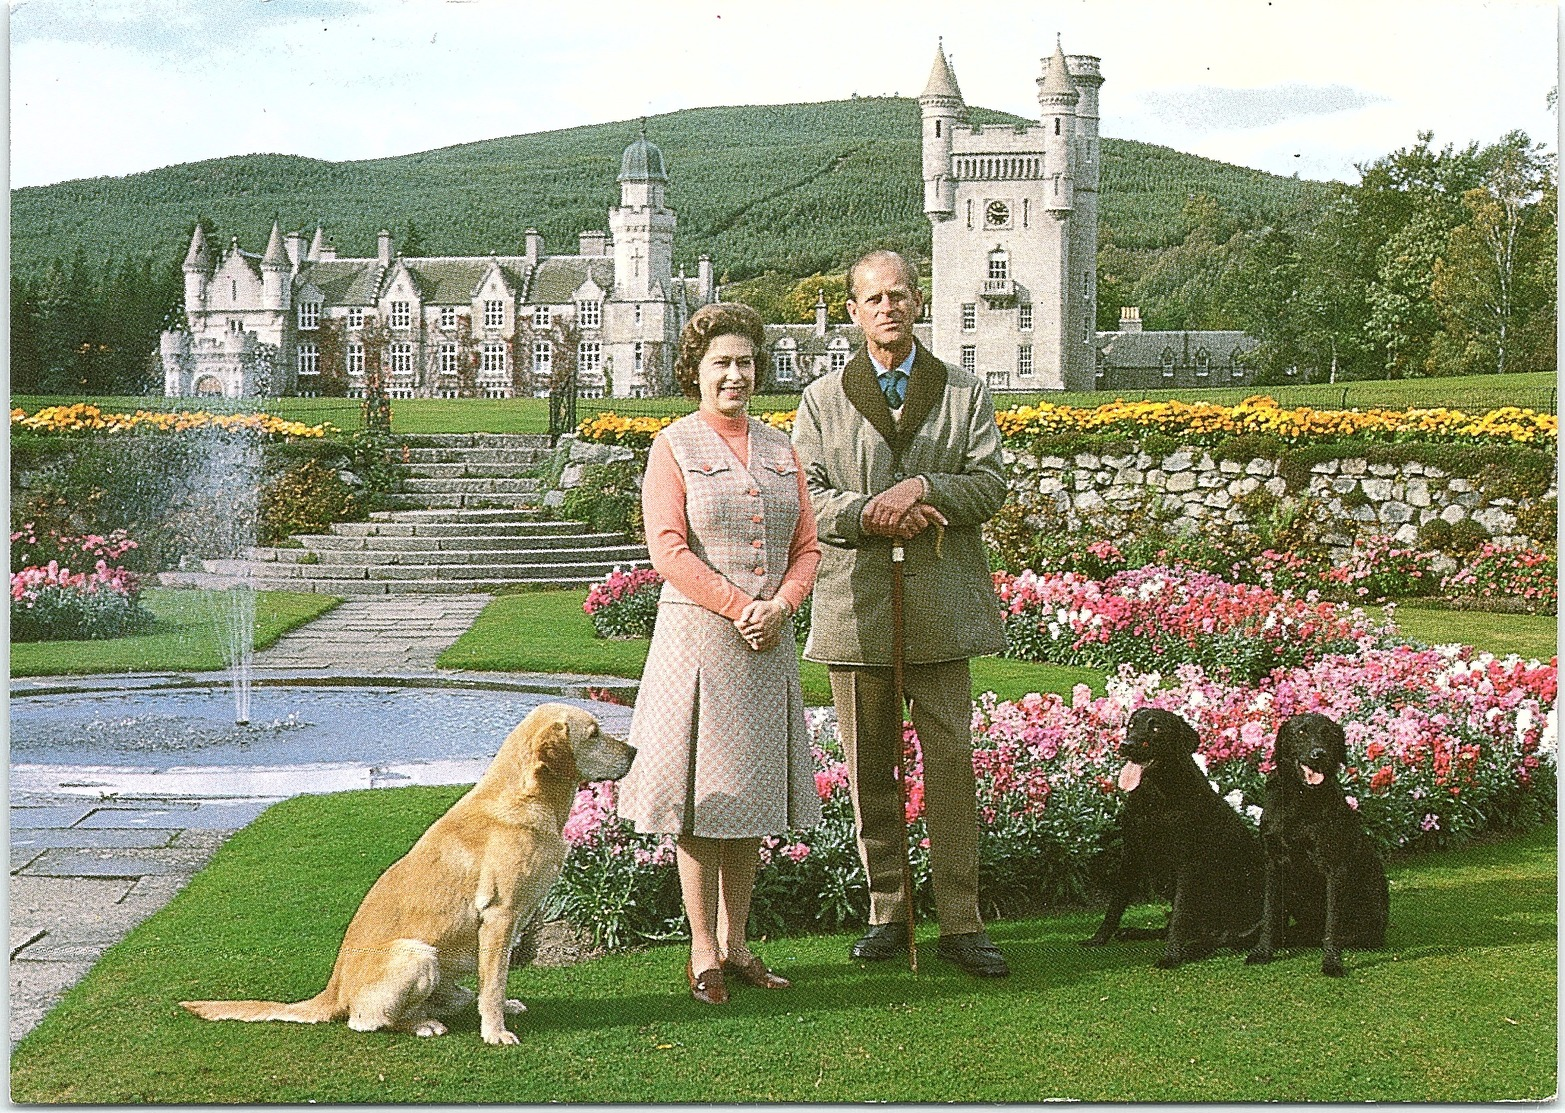 H.M. The Queen And H.R.H. The Duke Of Edinburgh In The Gardens Of Balmoral Castle - Familias Reales